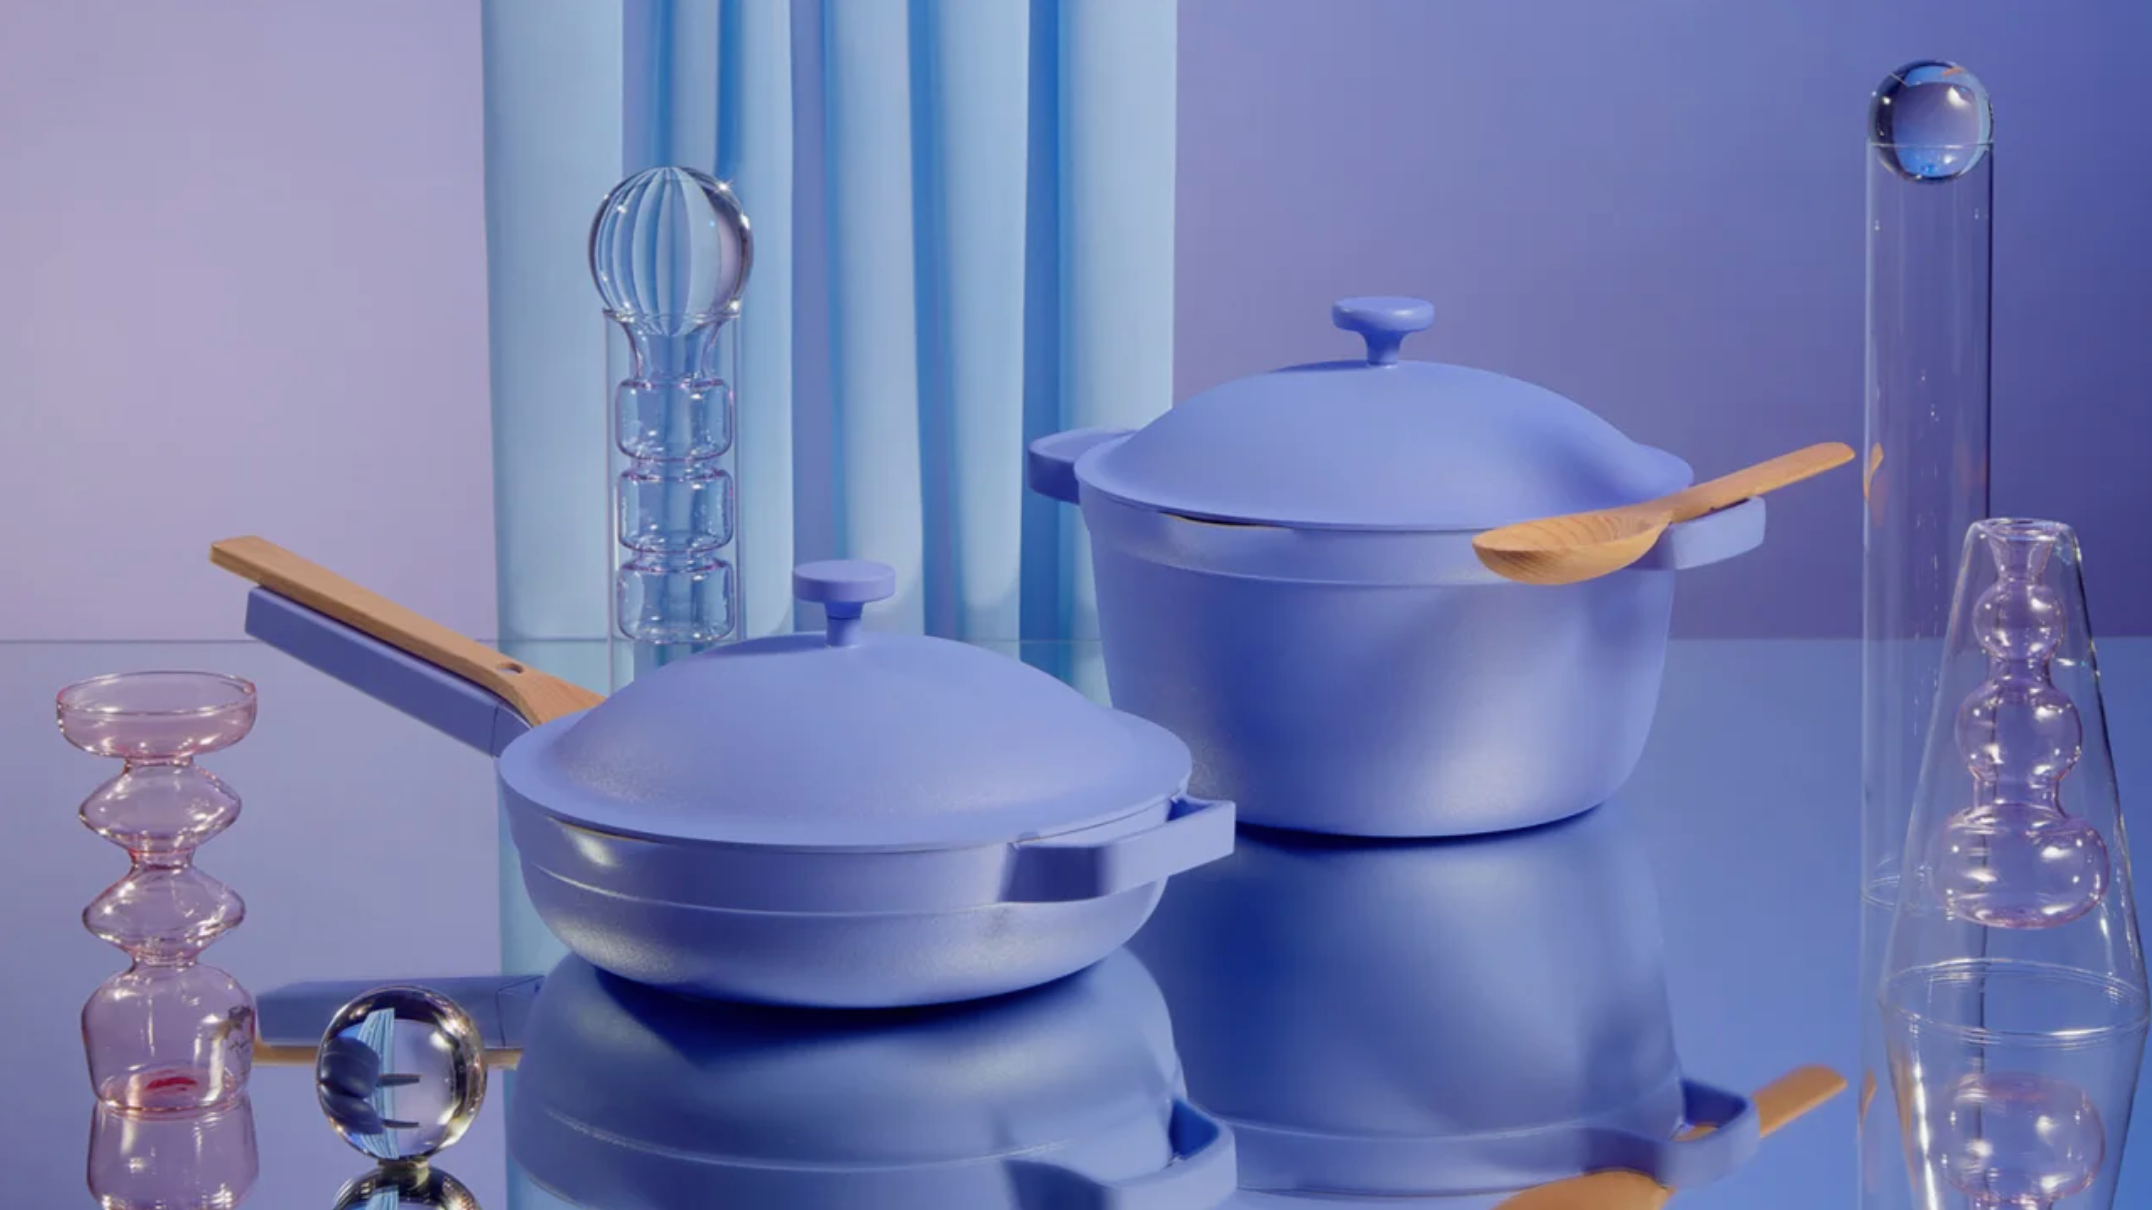 Selena Gomez sparks joy with a new cookware collection